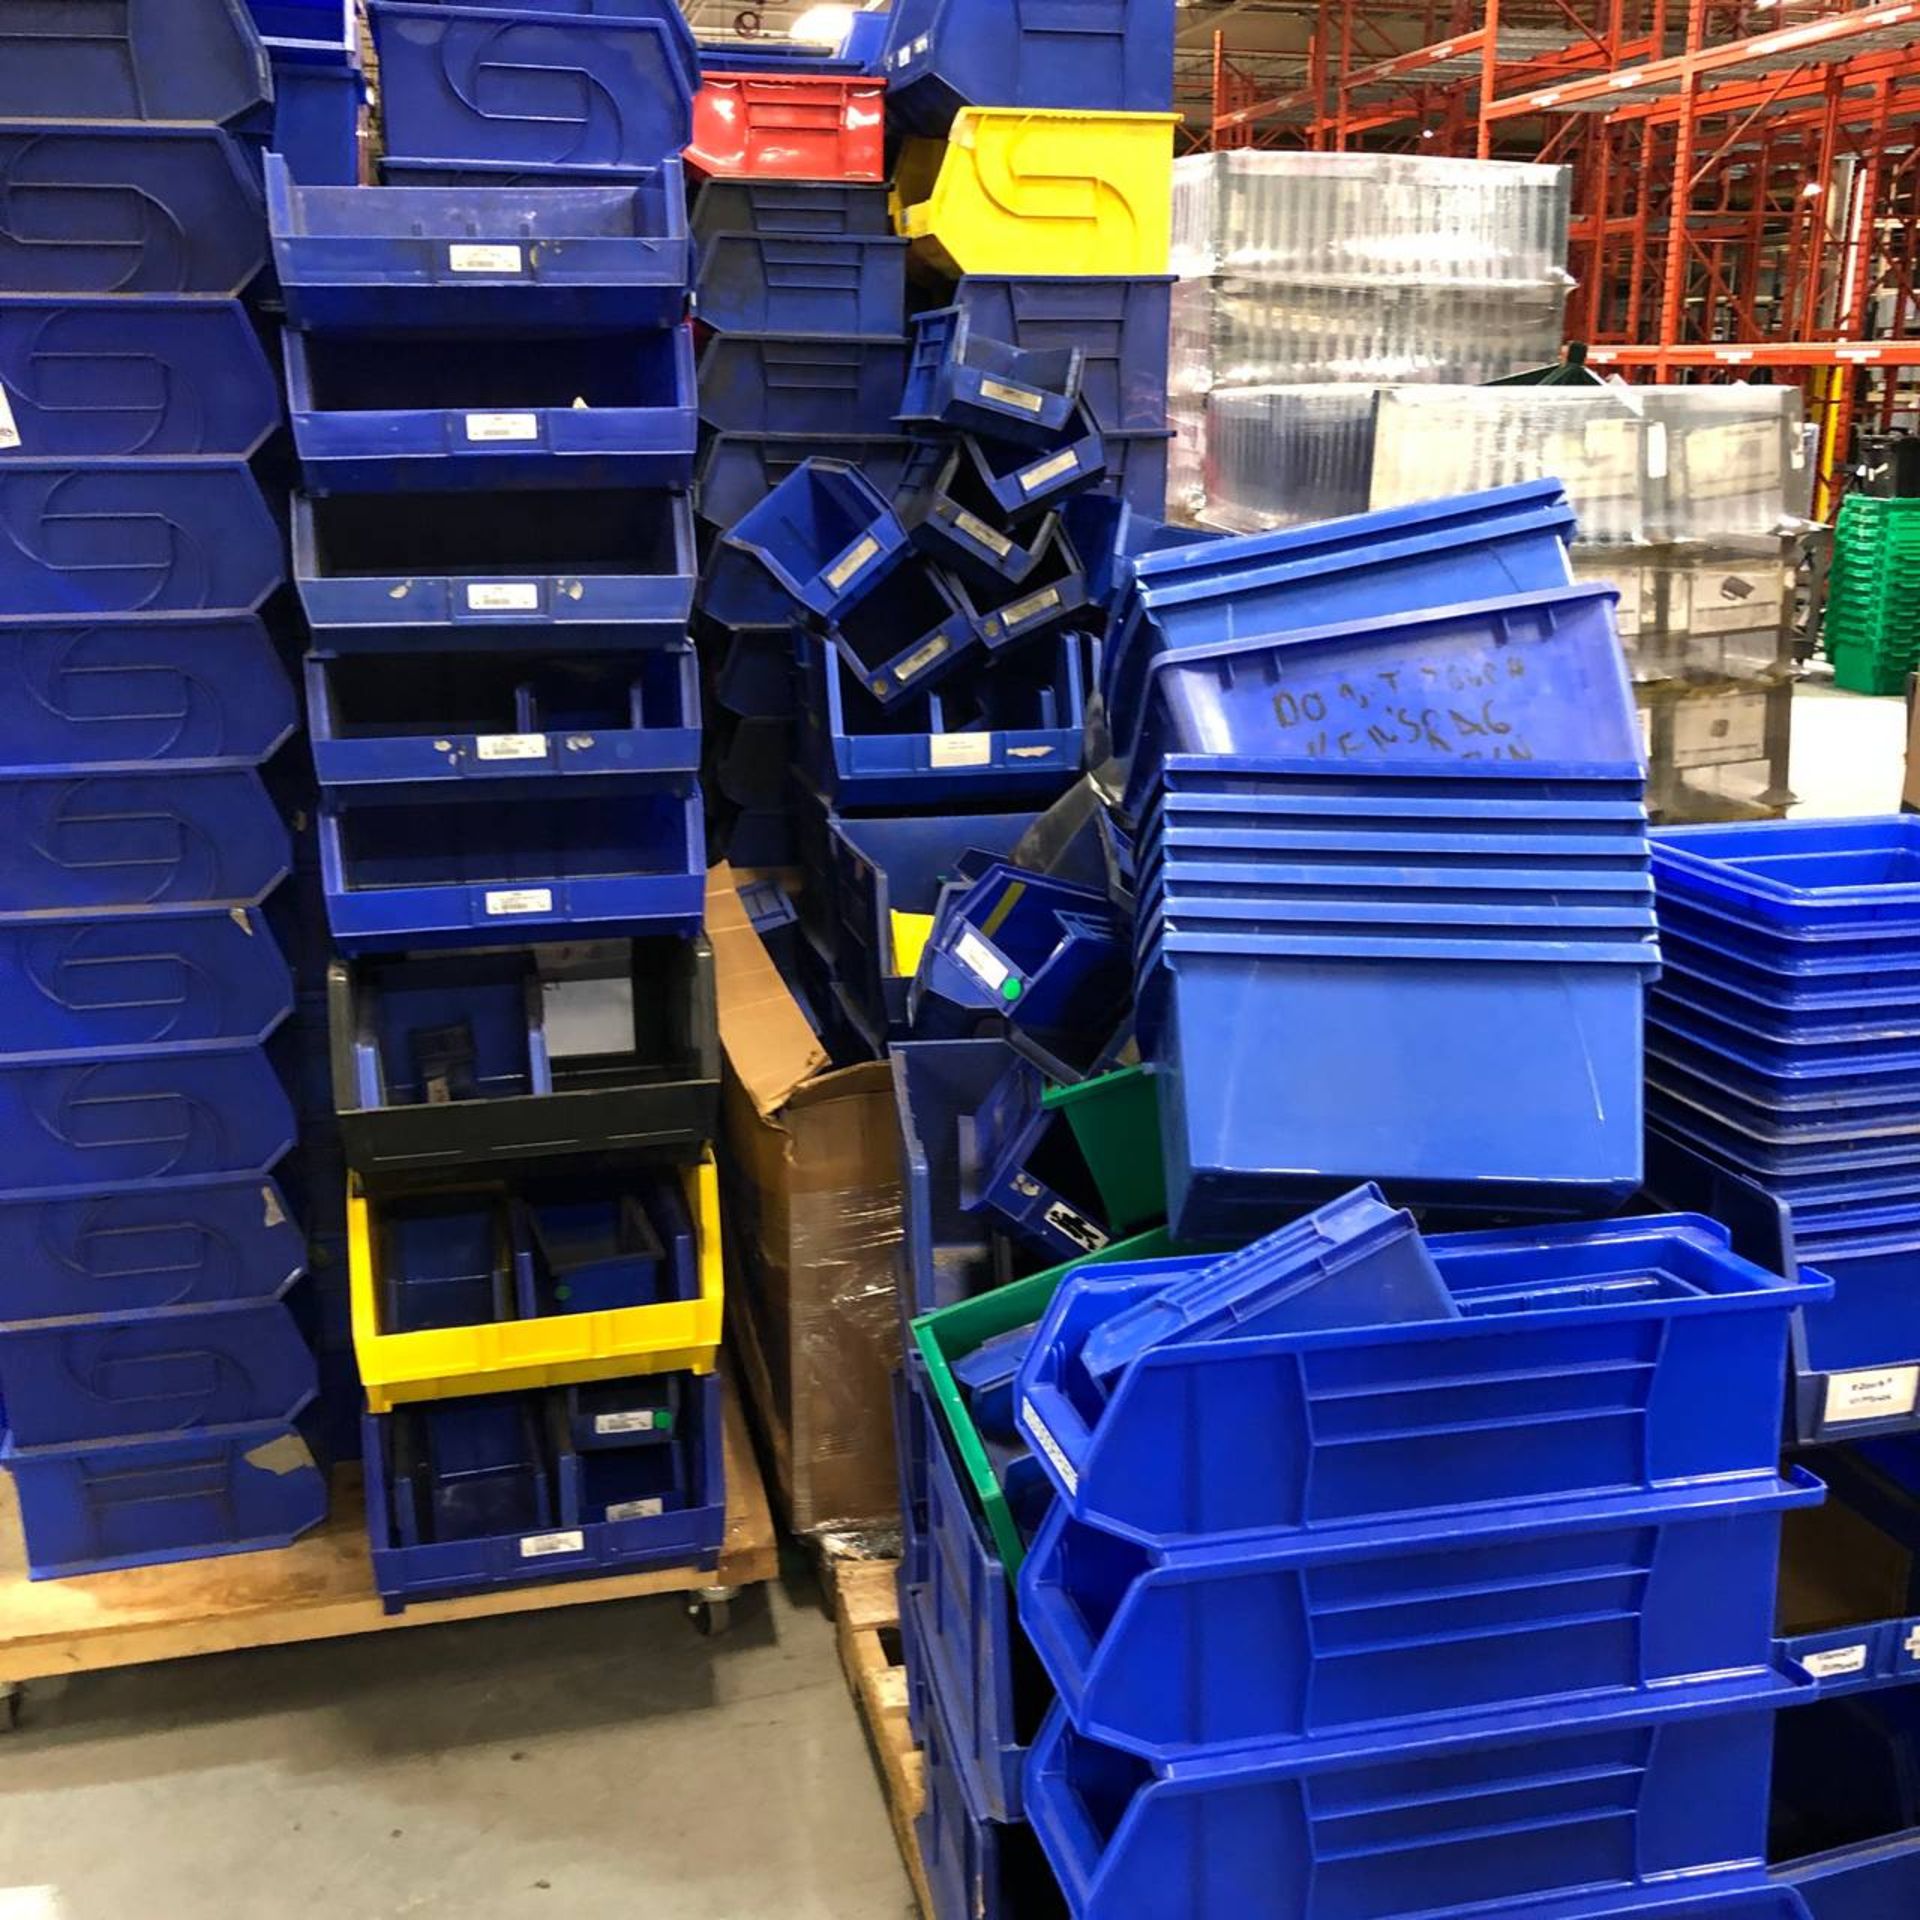 8 Skids of Assorted Sized Plastic Bins - Image 2 of 4